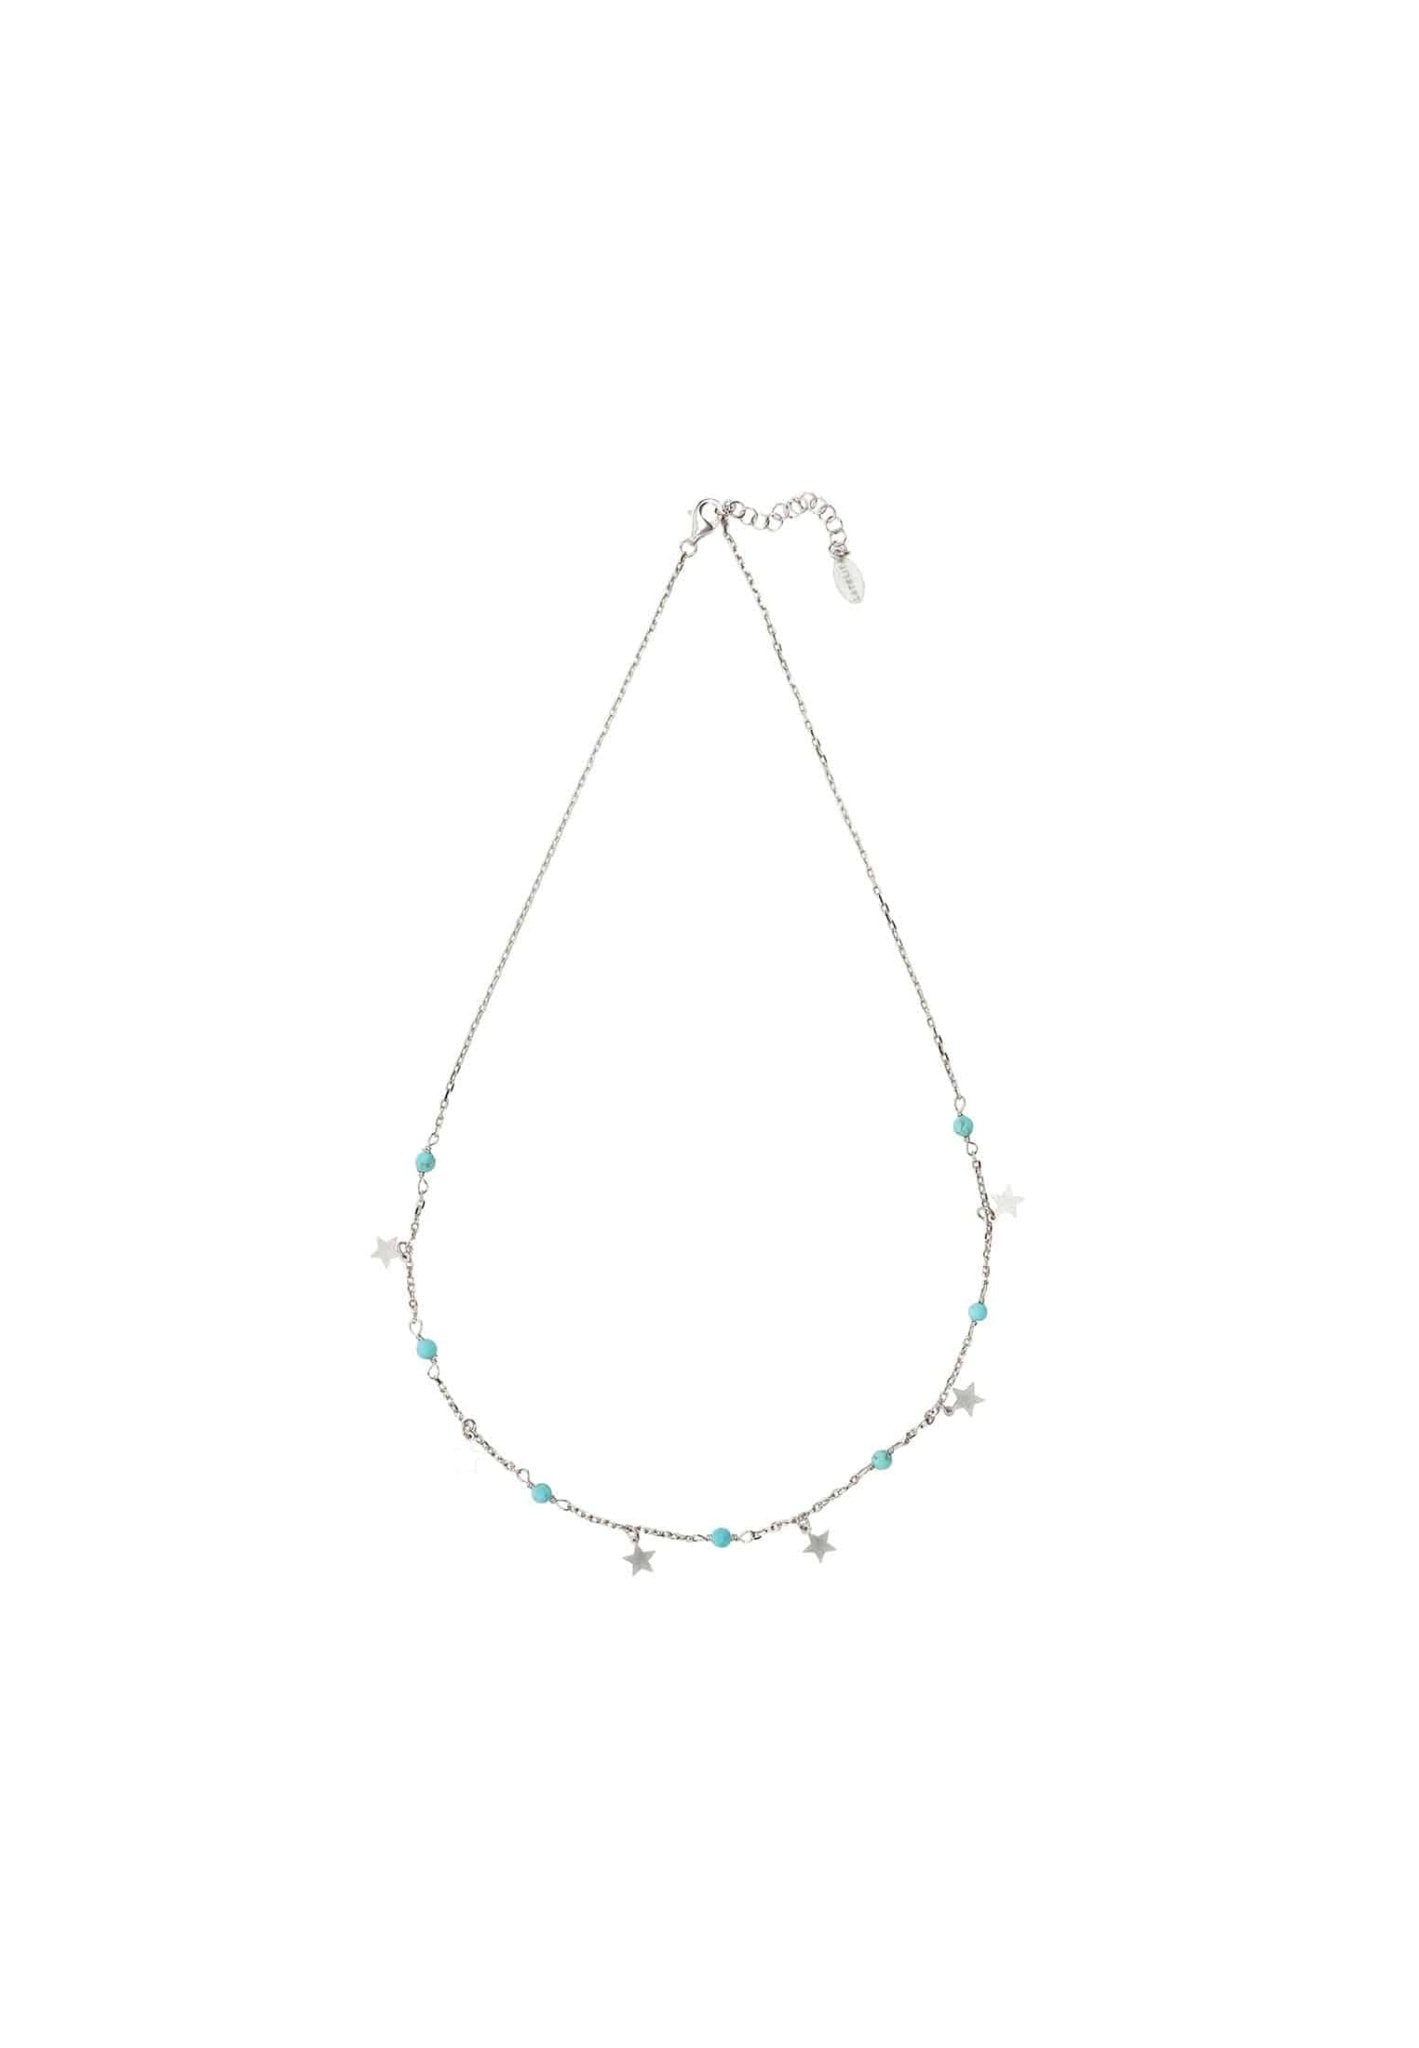 Turquoise Star Choker Necklace Silver - LATELITA Necklaces